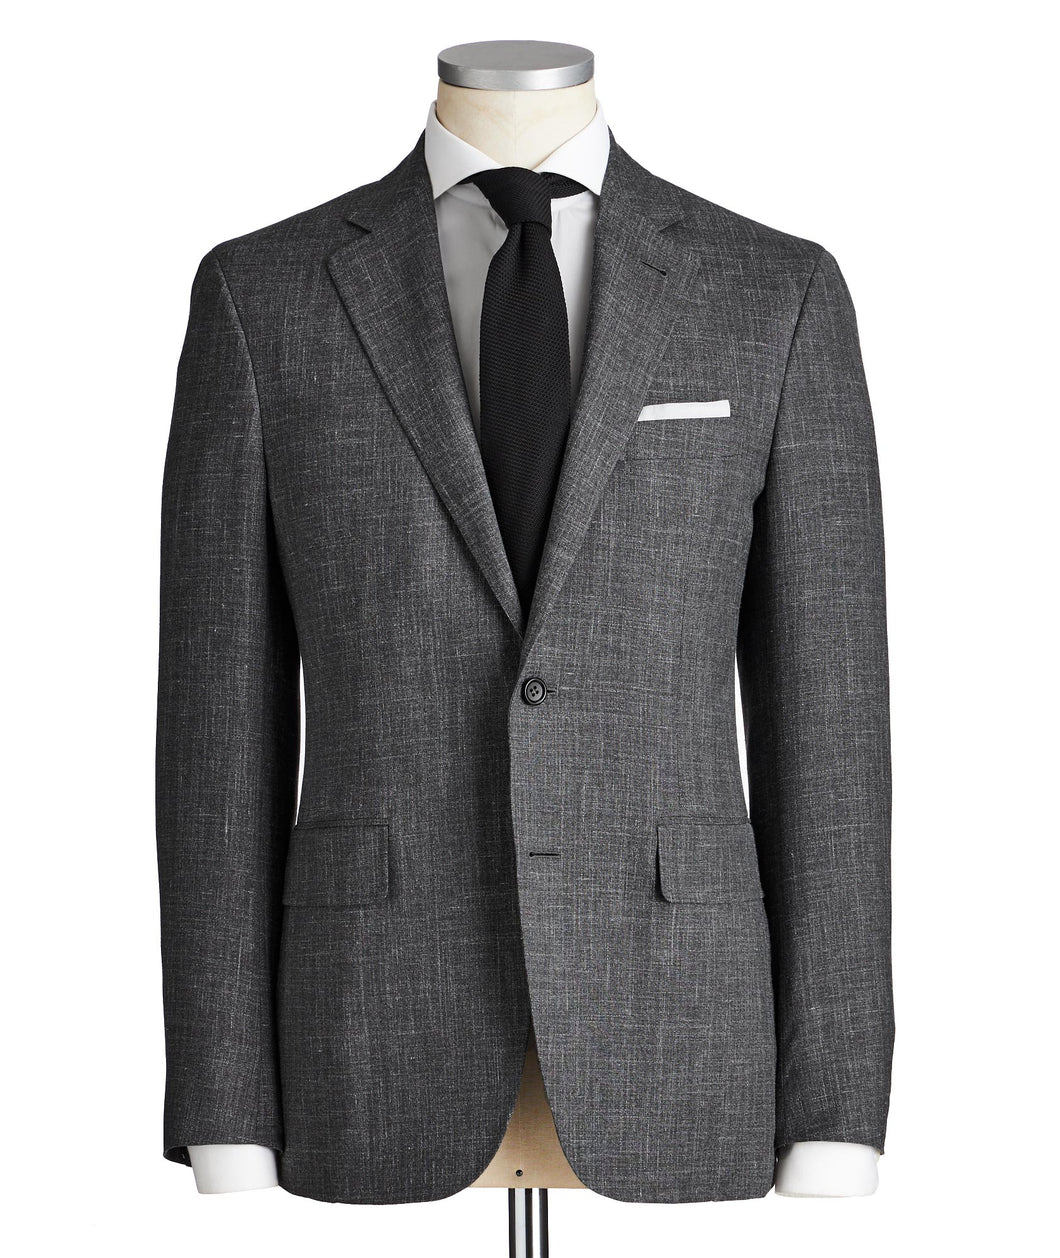 Canali Kei Crosshatched Wool, Silk & Linen Suit